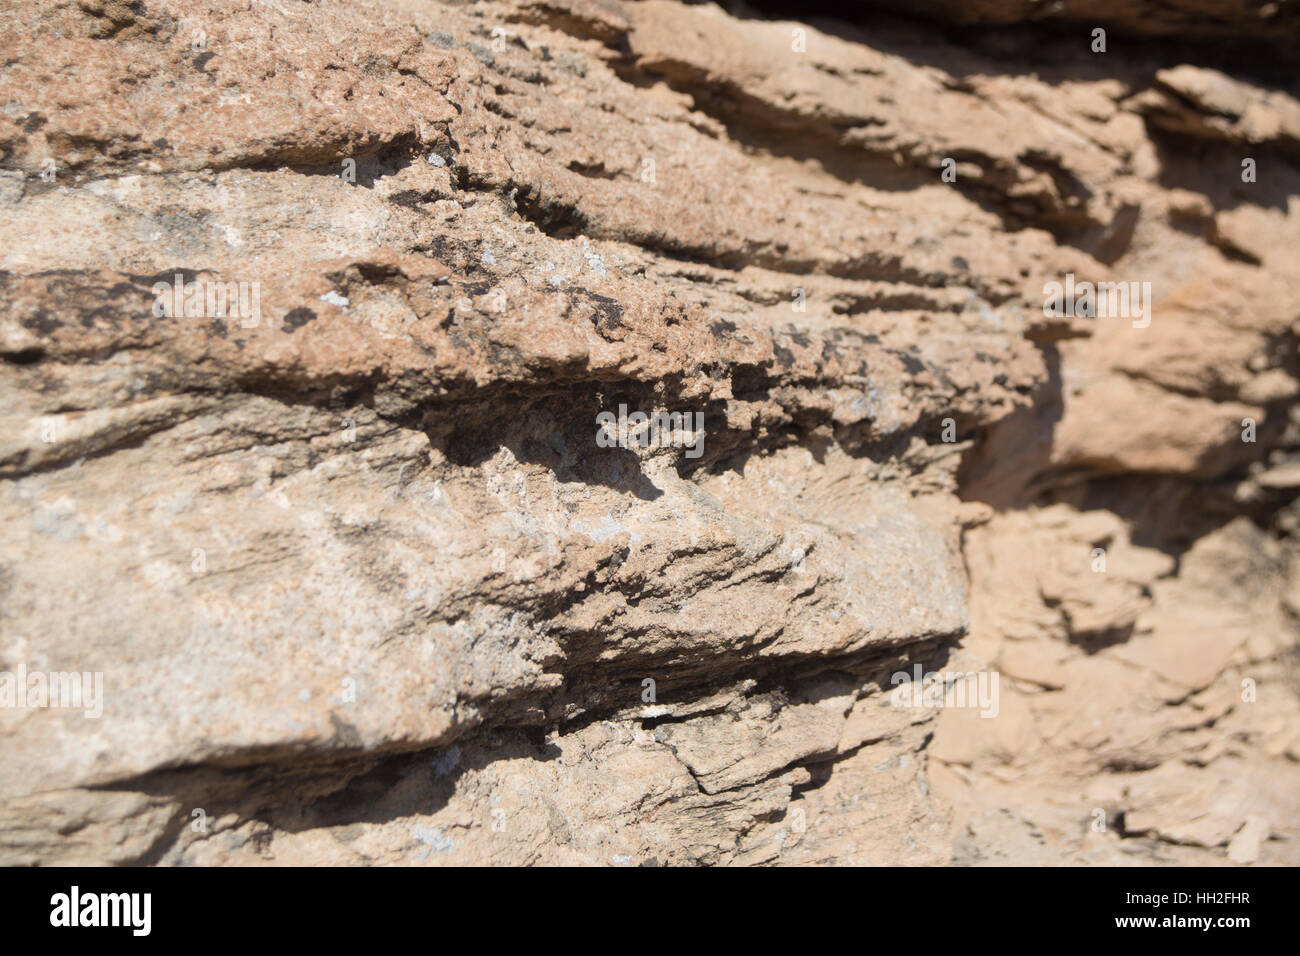 A protrusion or shelf of sandstone in the desert of western Colorado Stock Photo